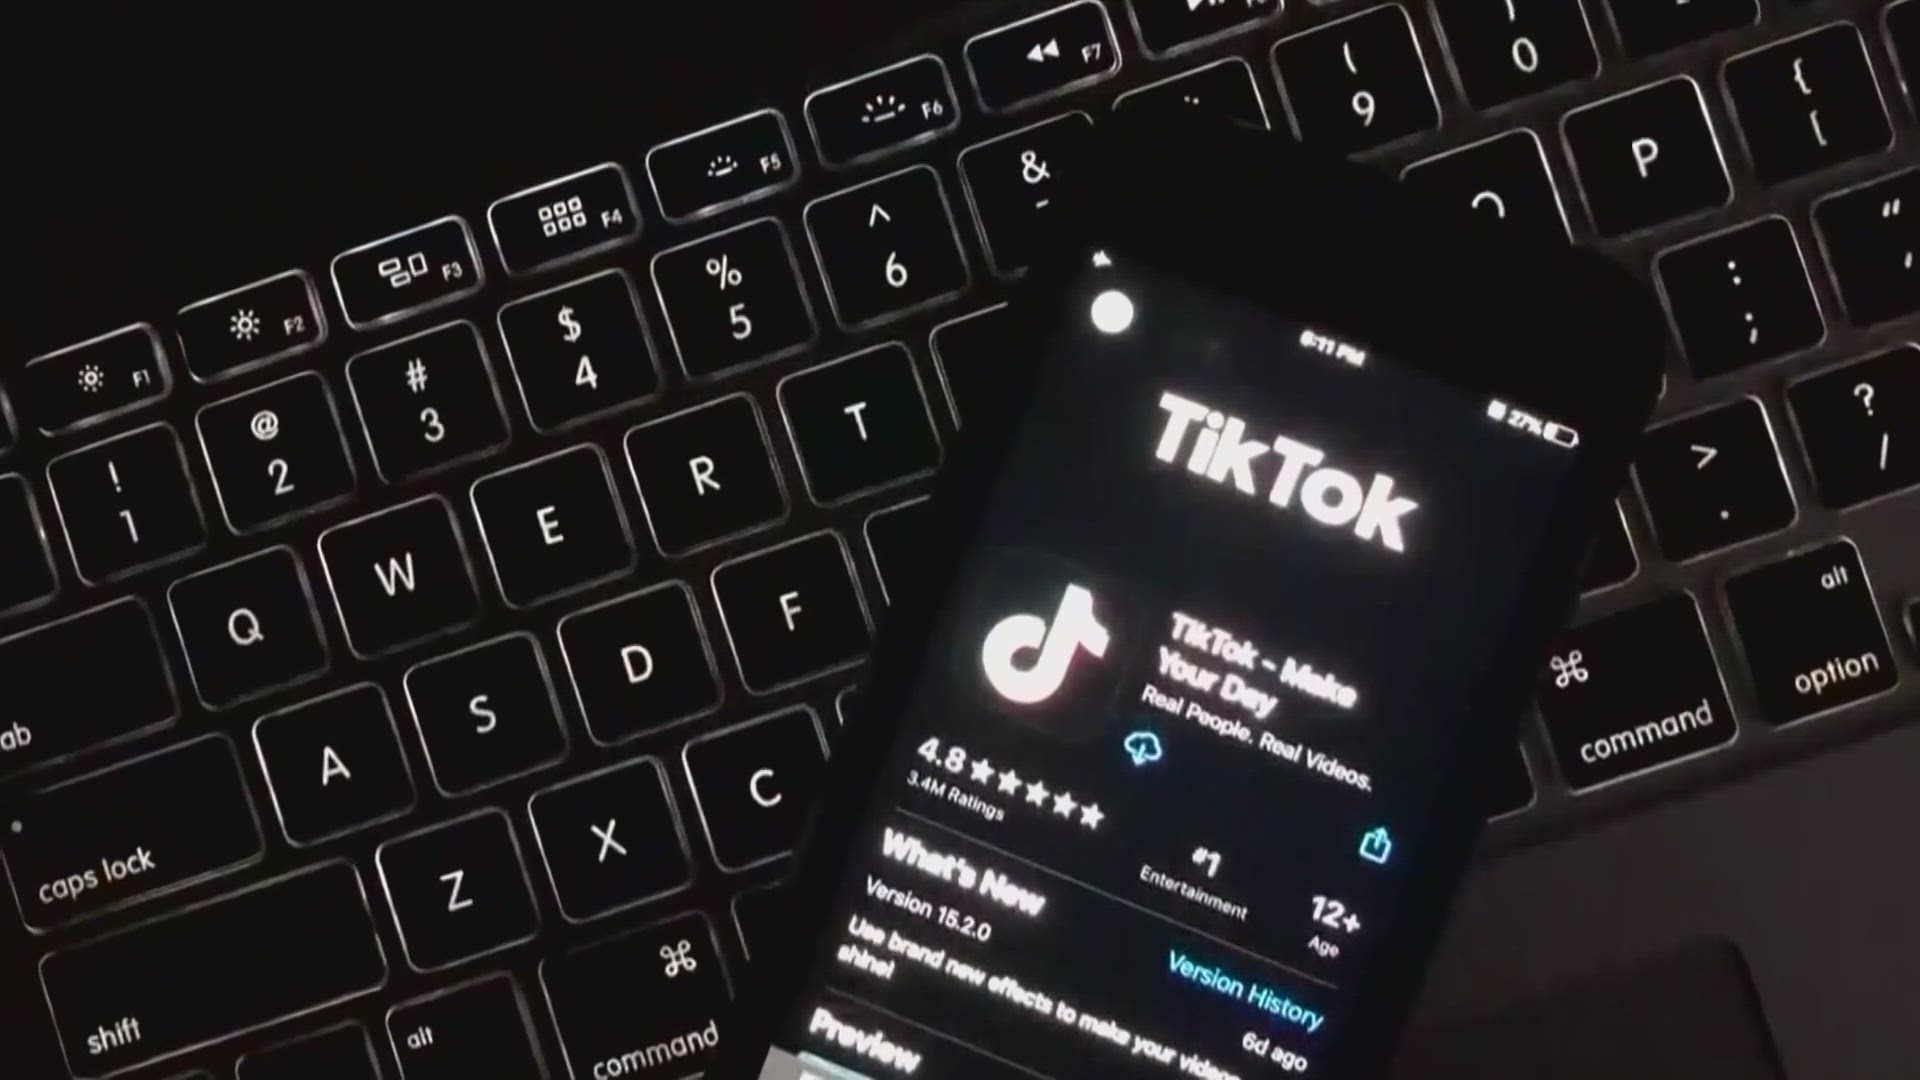 The bill would give Tik Tok five months to separate from its parent company, Byte Dance, which is linked to China. Otherwise, the app would be banned.